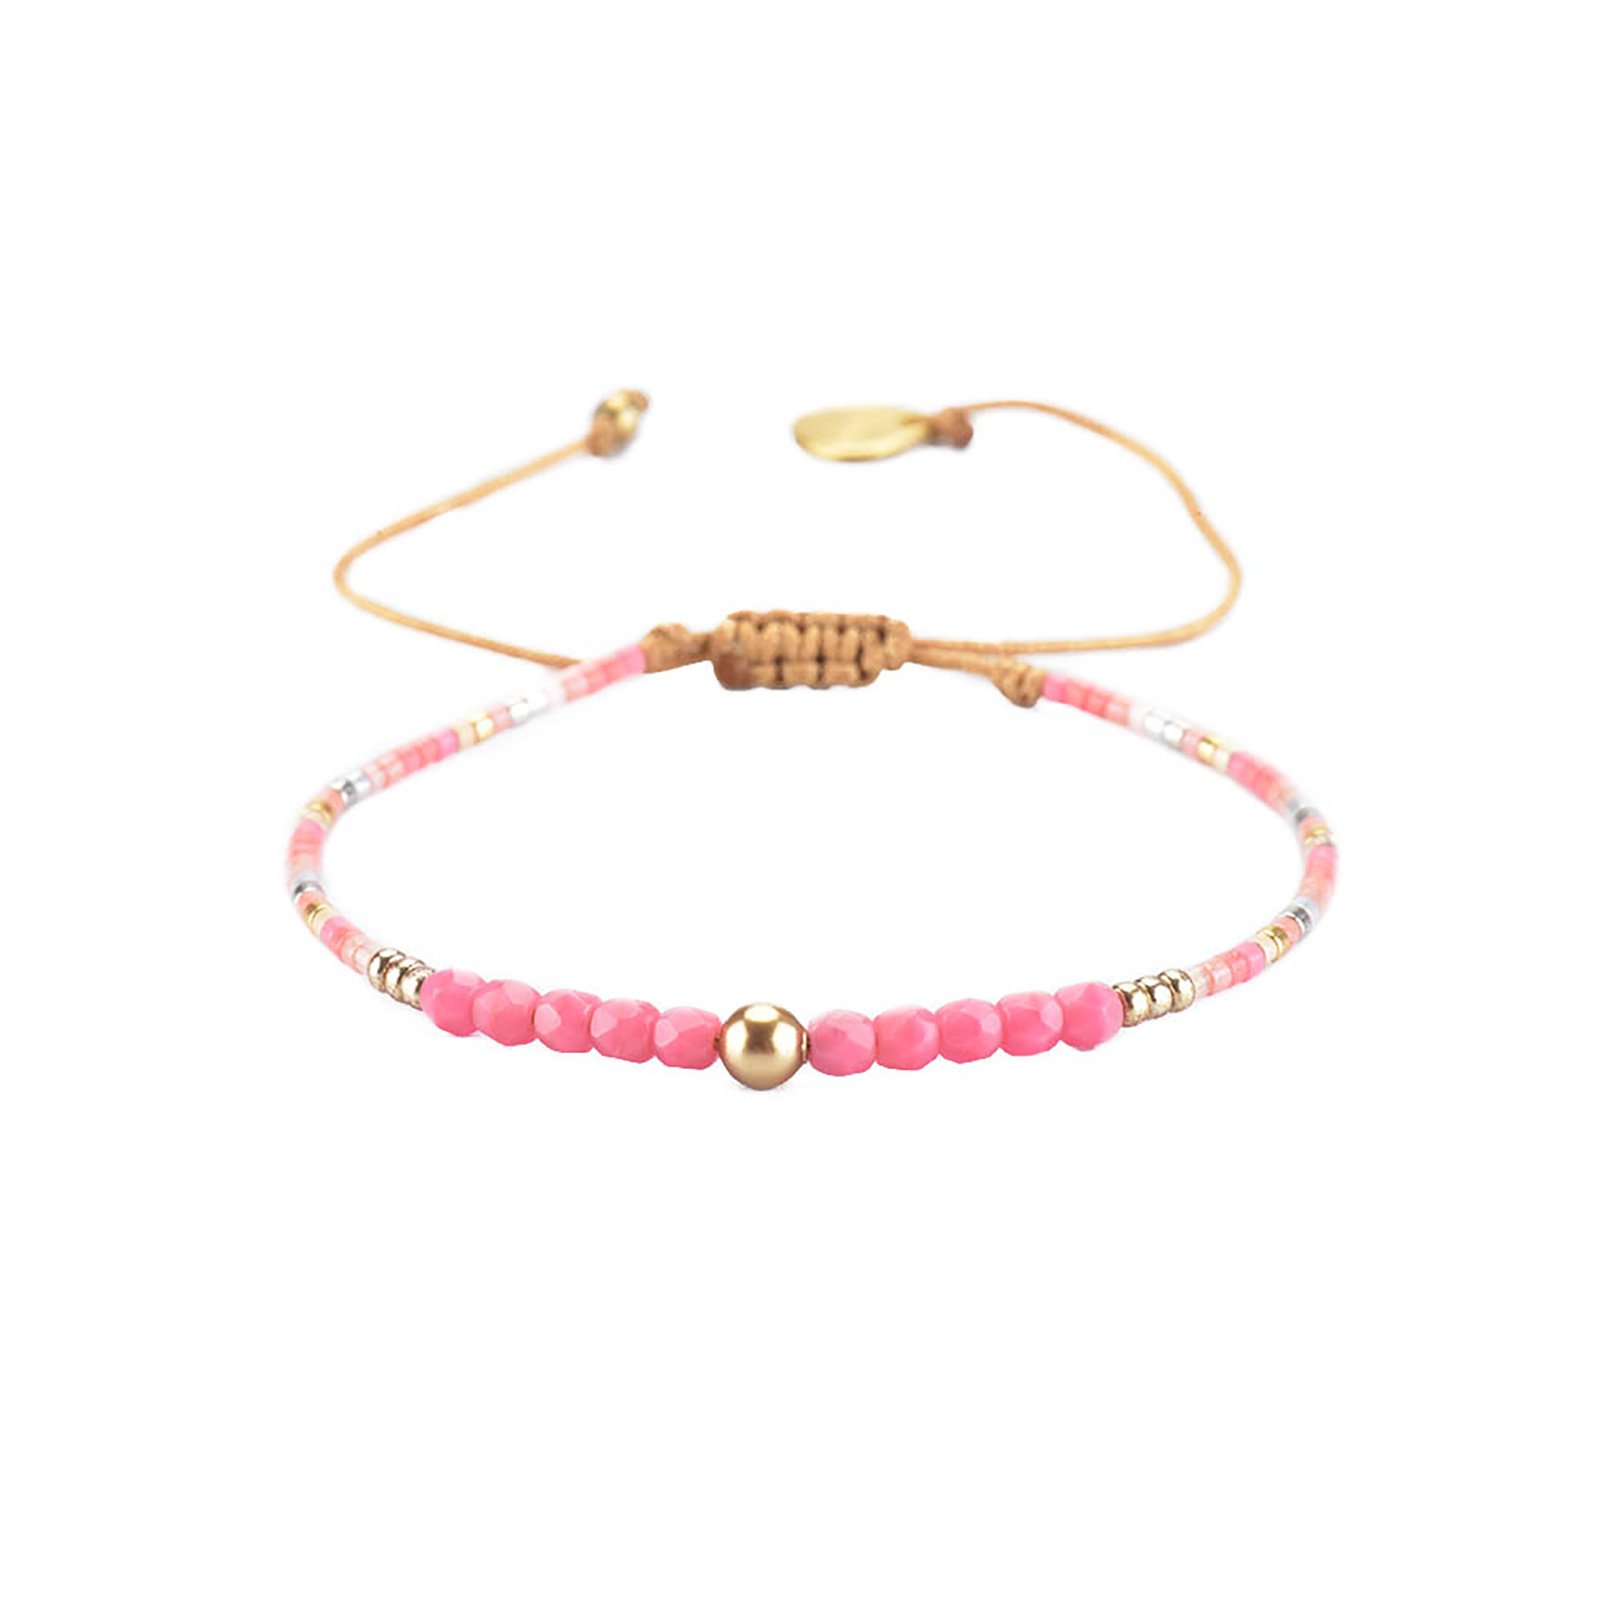 Adjustable Slim Pink / Gold Bracelet With Faceted Beads - Liny 2.0-be ...